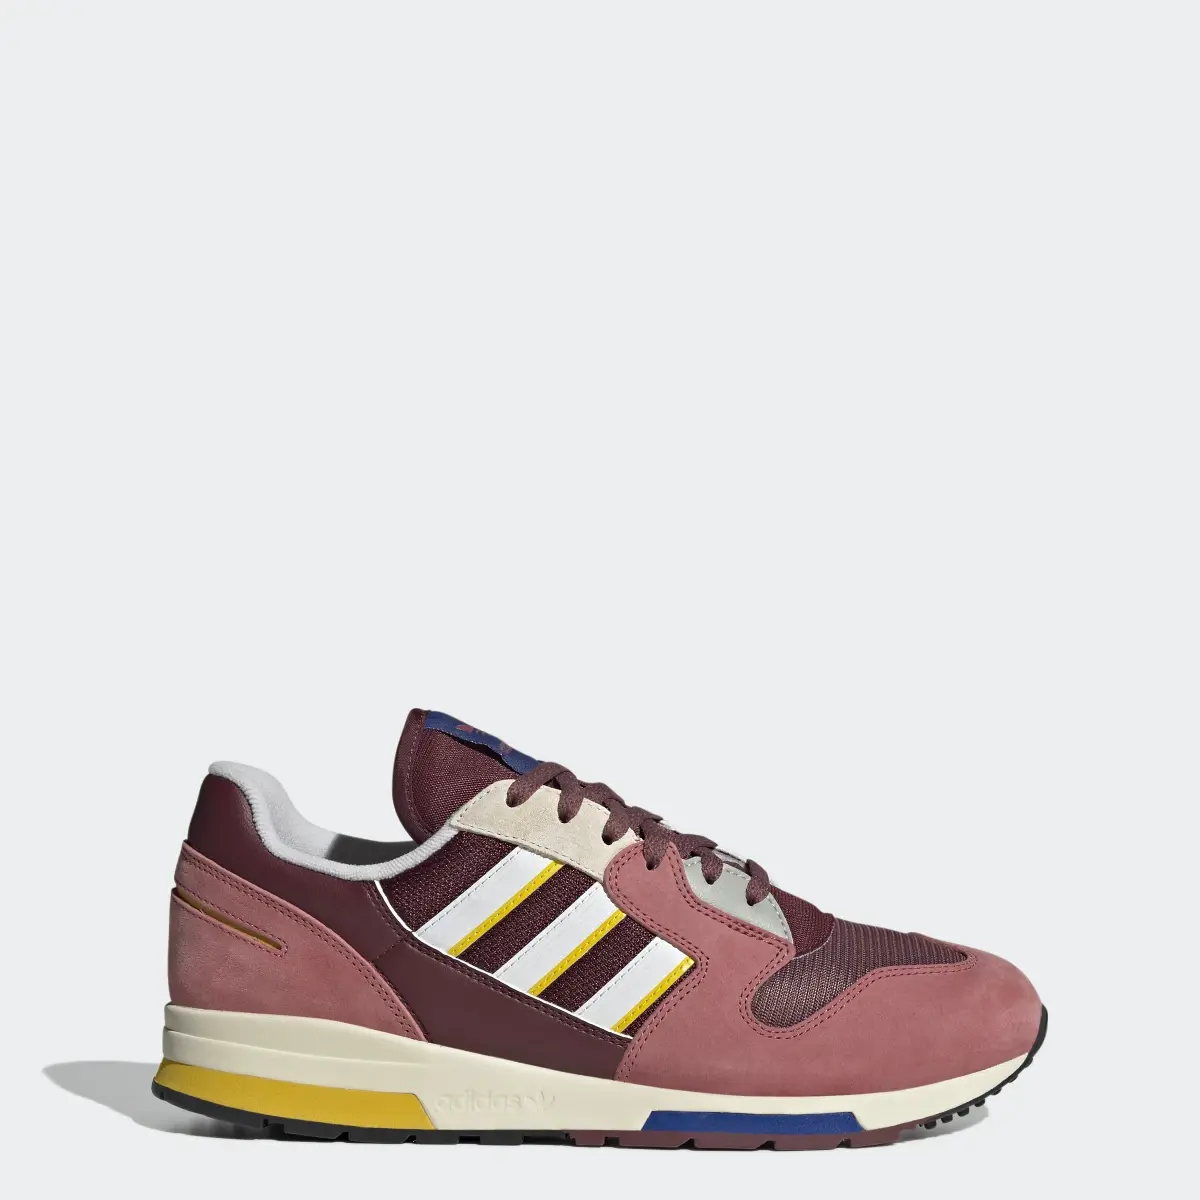 Adidas ZX 420 Shoes. 1